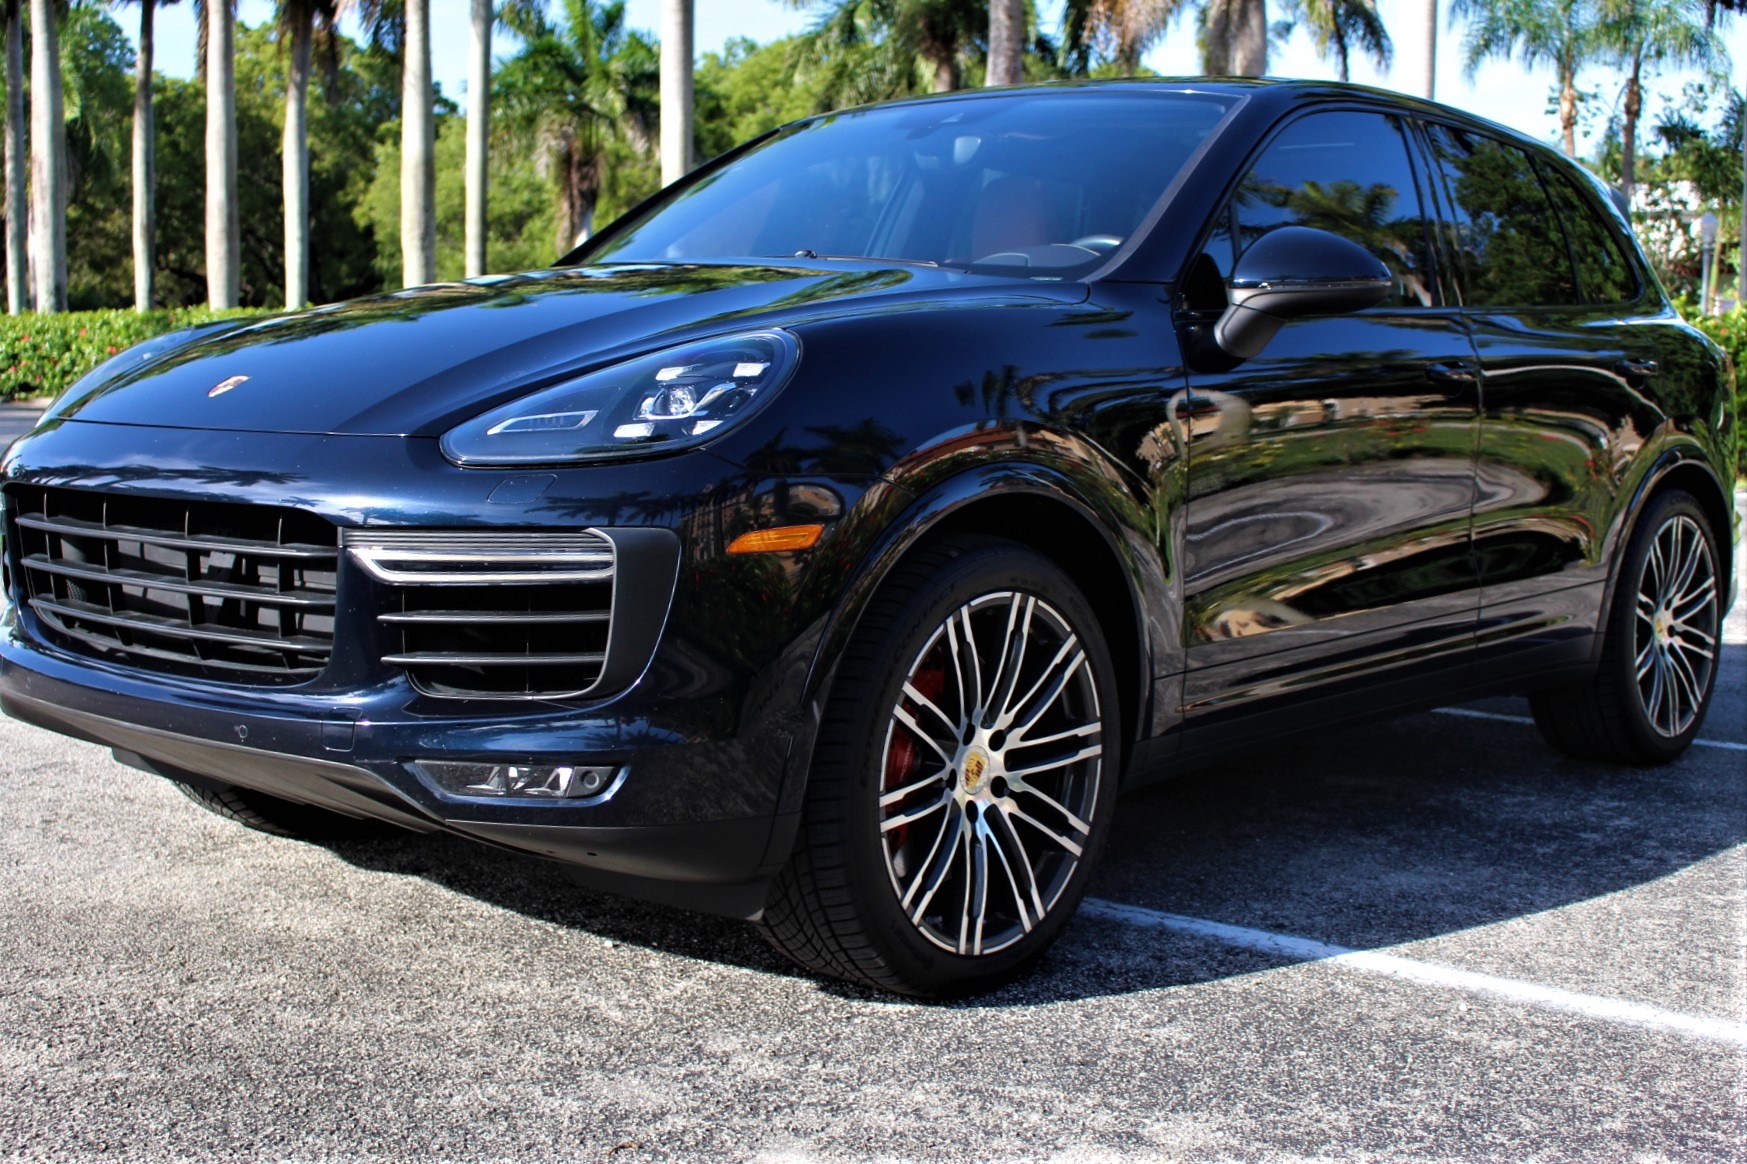 Used 2018 Porsche Cayenne Turbo for sale Sold at The Gables Sports Cars in Miami FL 33146 3